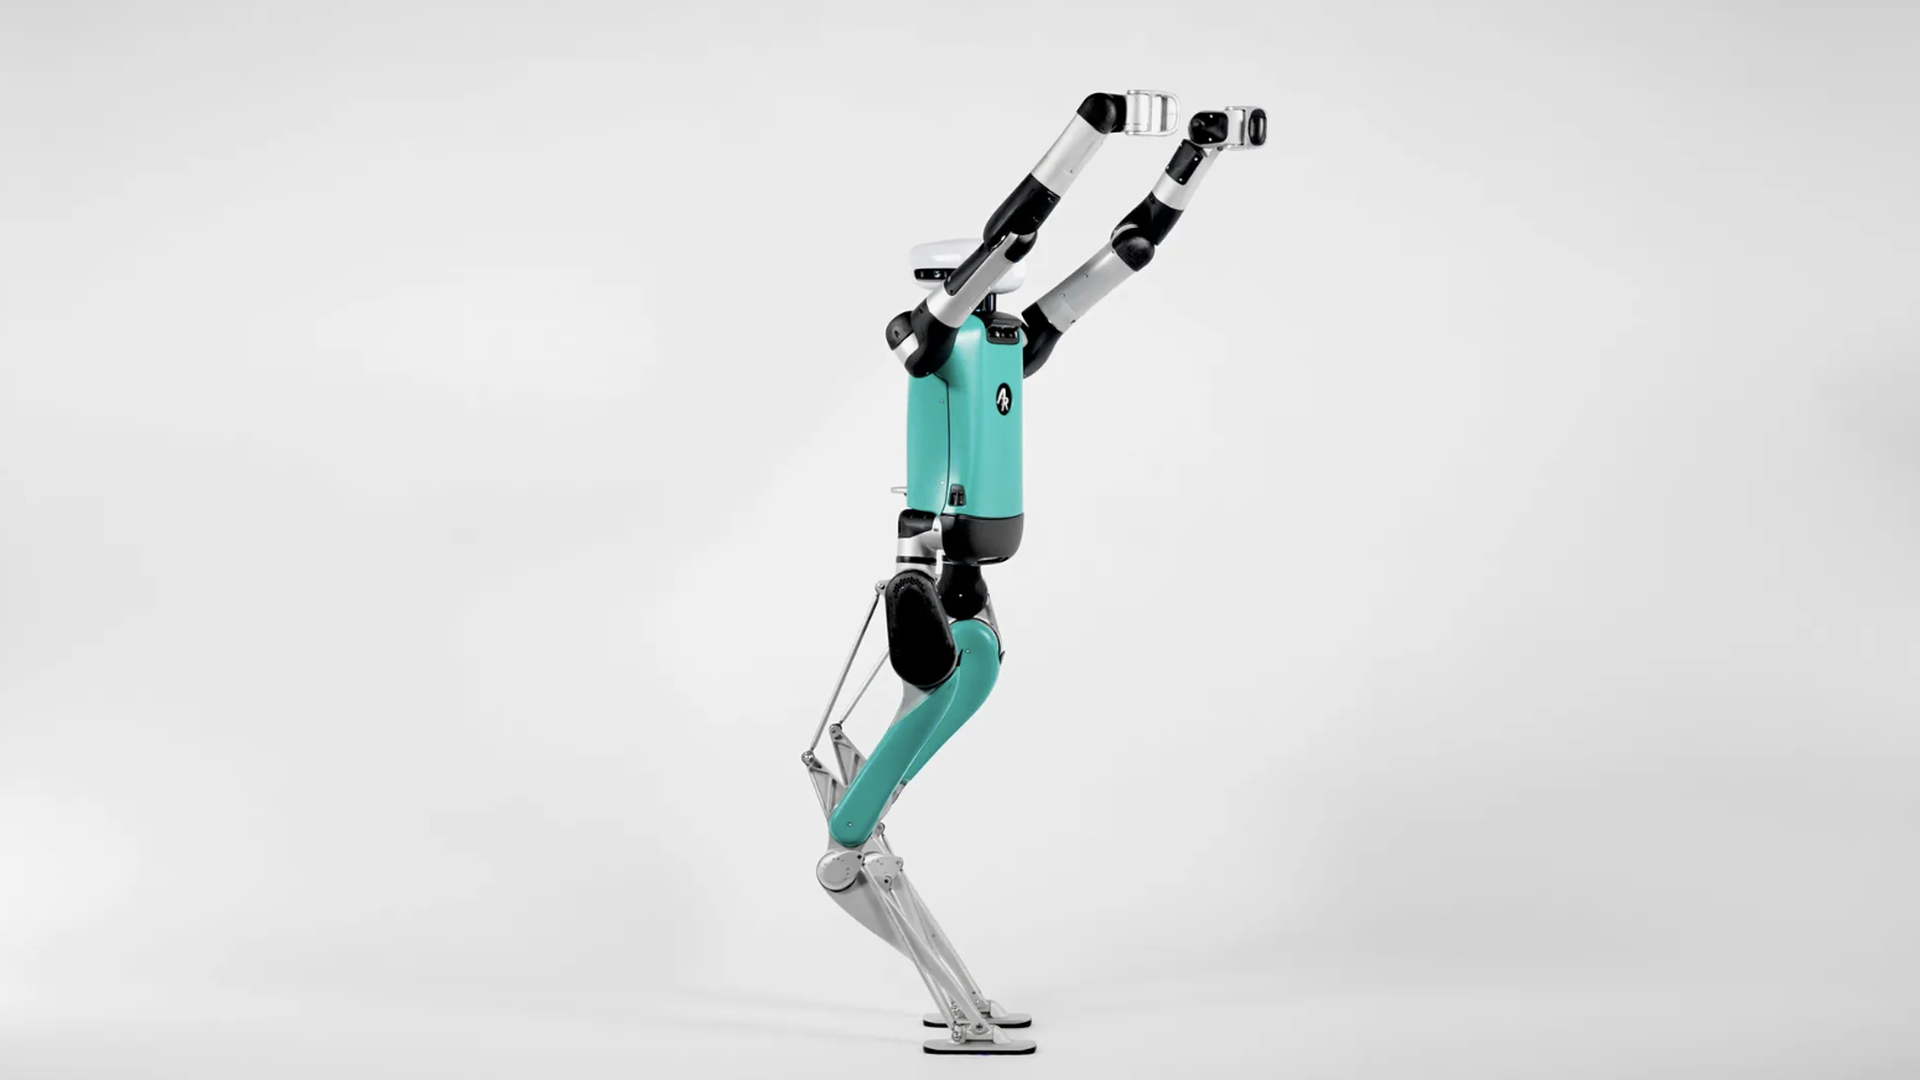 Digit, a bipedal robot from Agility Robotics, will be mass-produced at a factory in Oregon. Image courtesy of Agility Robotics.